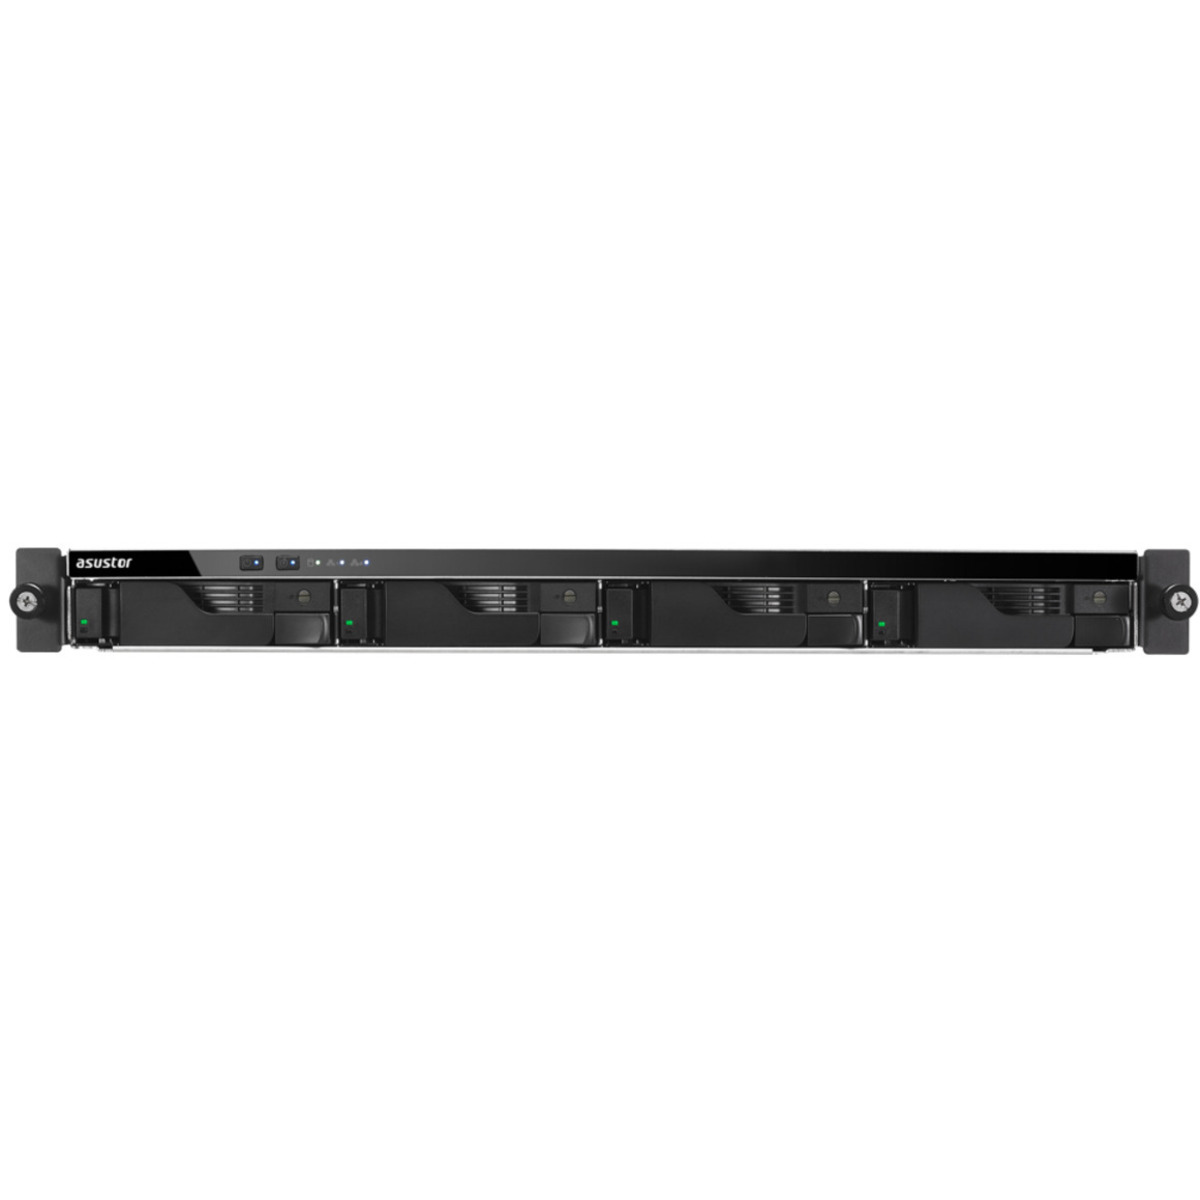 buy $2522 ASUSTOR LOCKERSTOR 4RS AS6504RS 48tb RackMount NAS - Network Attached Storage Device 4x12000gb Seagate IronWolf Pro ST12000NT001 3.5 7200rpm SATA 6Gb/s HDD NAS Class Drives Installed - Burn-In Tested - FREE RAM UPGRADE - nas headquarters buy network attached storage server device das new raid-5 free shipping simply usa LOCKERSTOR 4RS AS6504RS